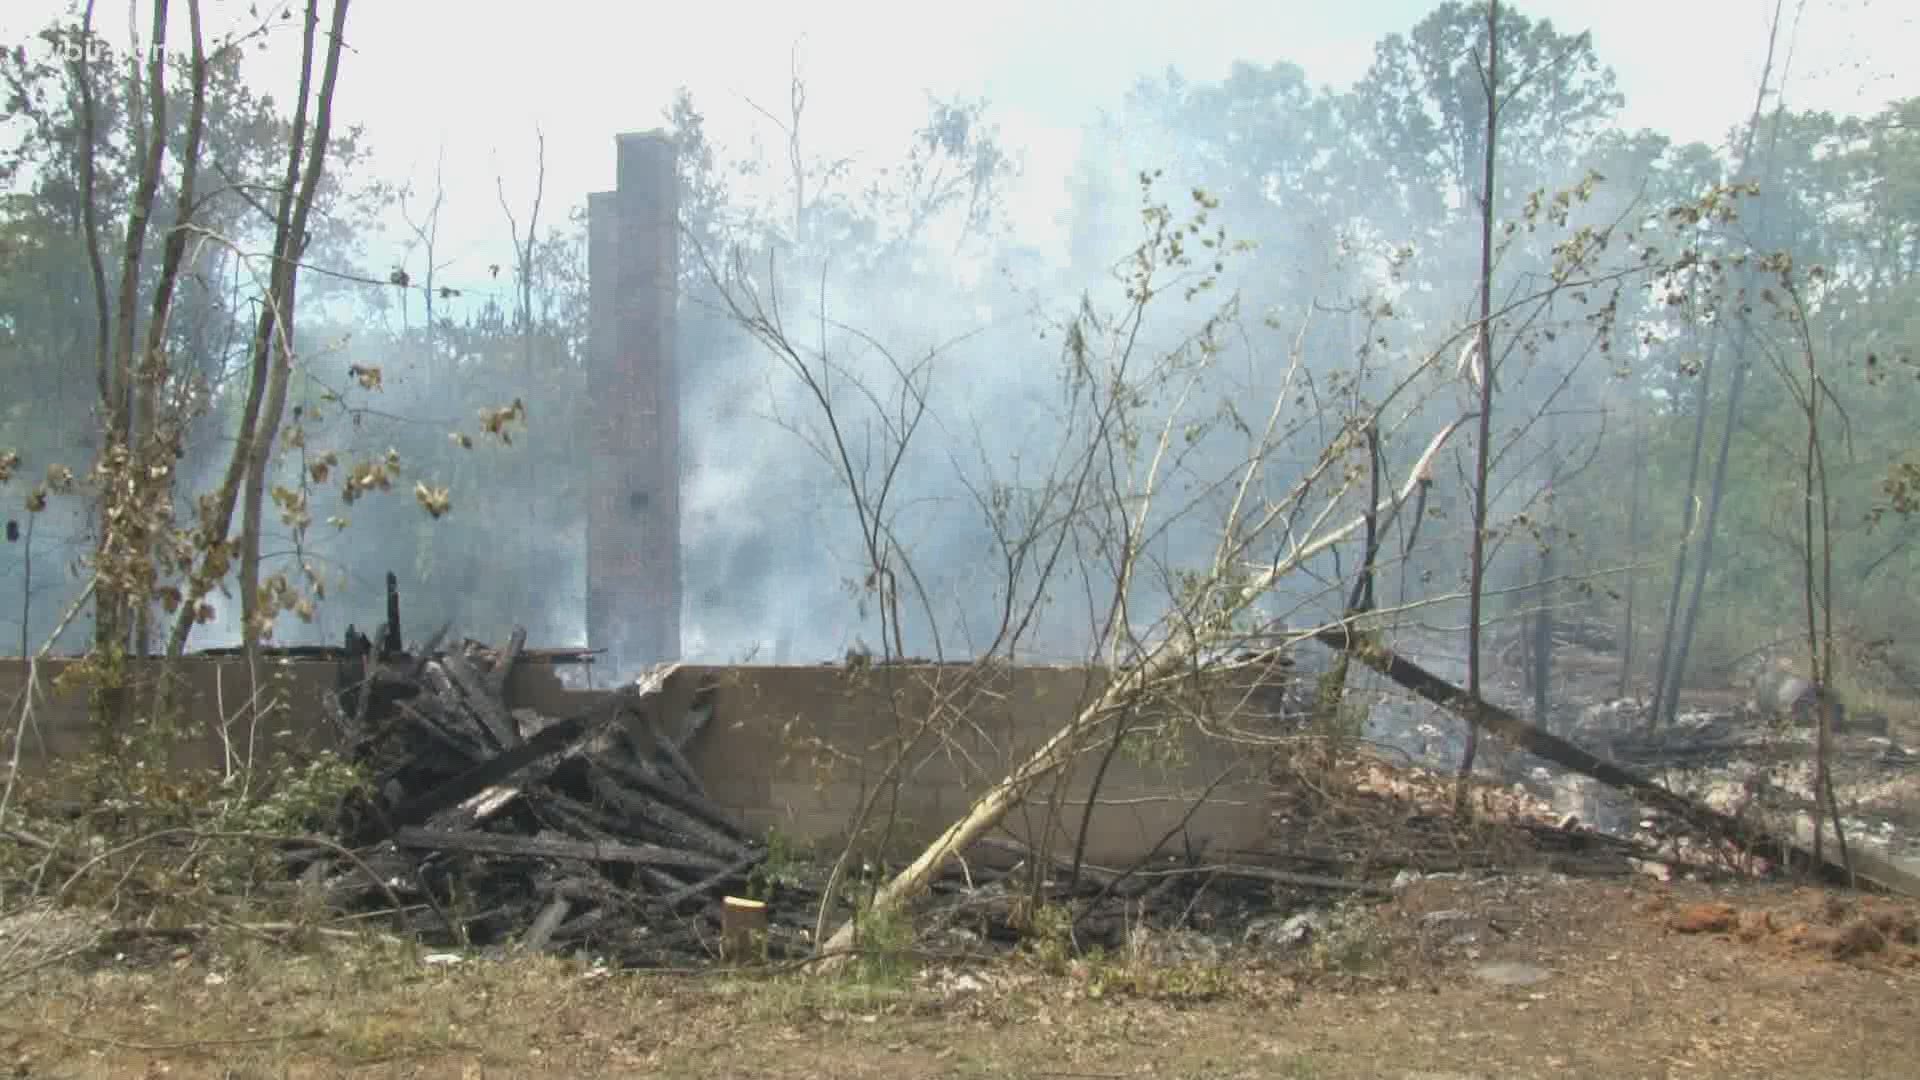 A big fire May 11 at an old school site off Northshore Drive appears to be arson, according to the Knox County Sheriff's Office.